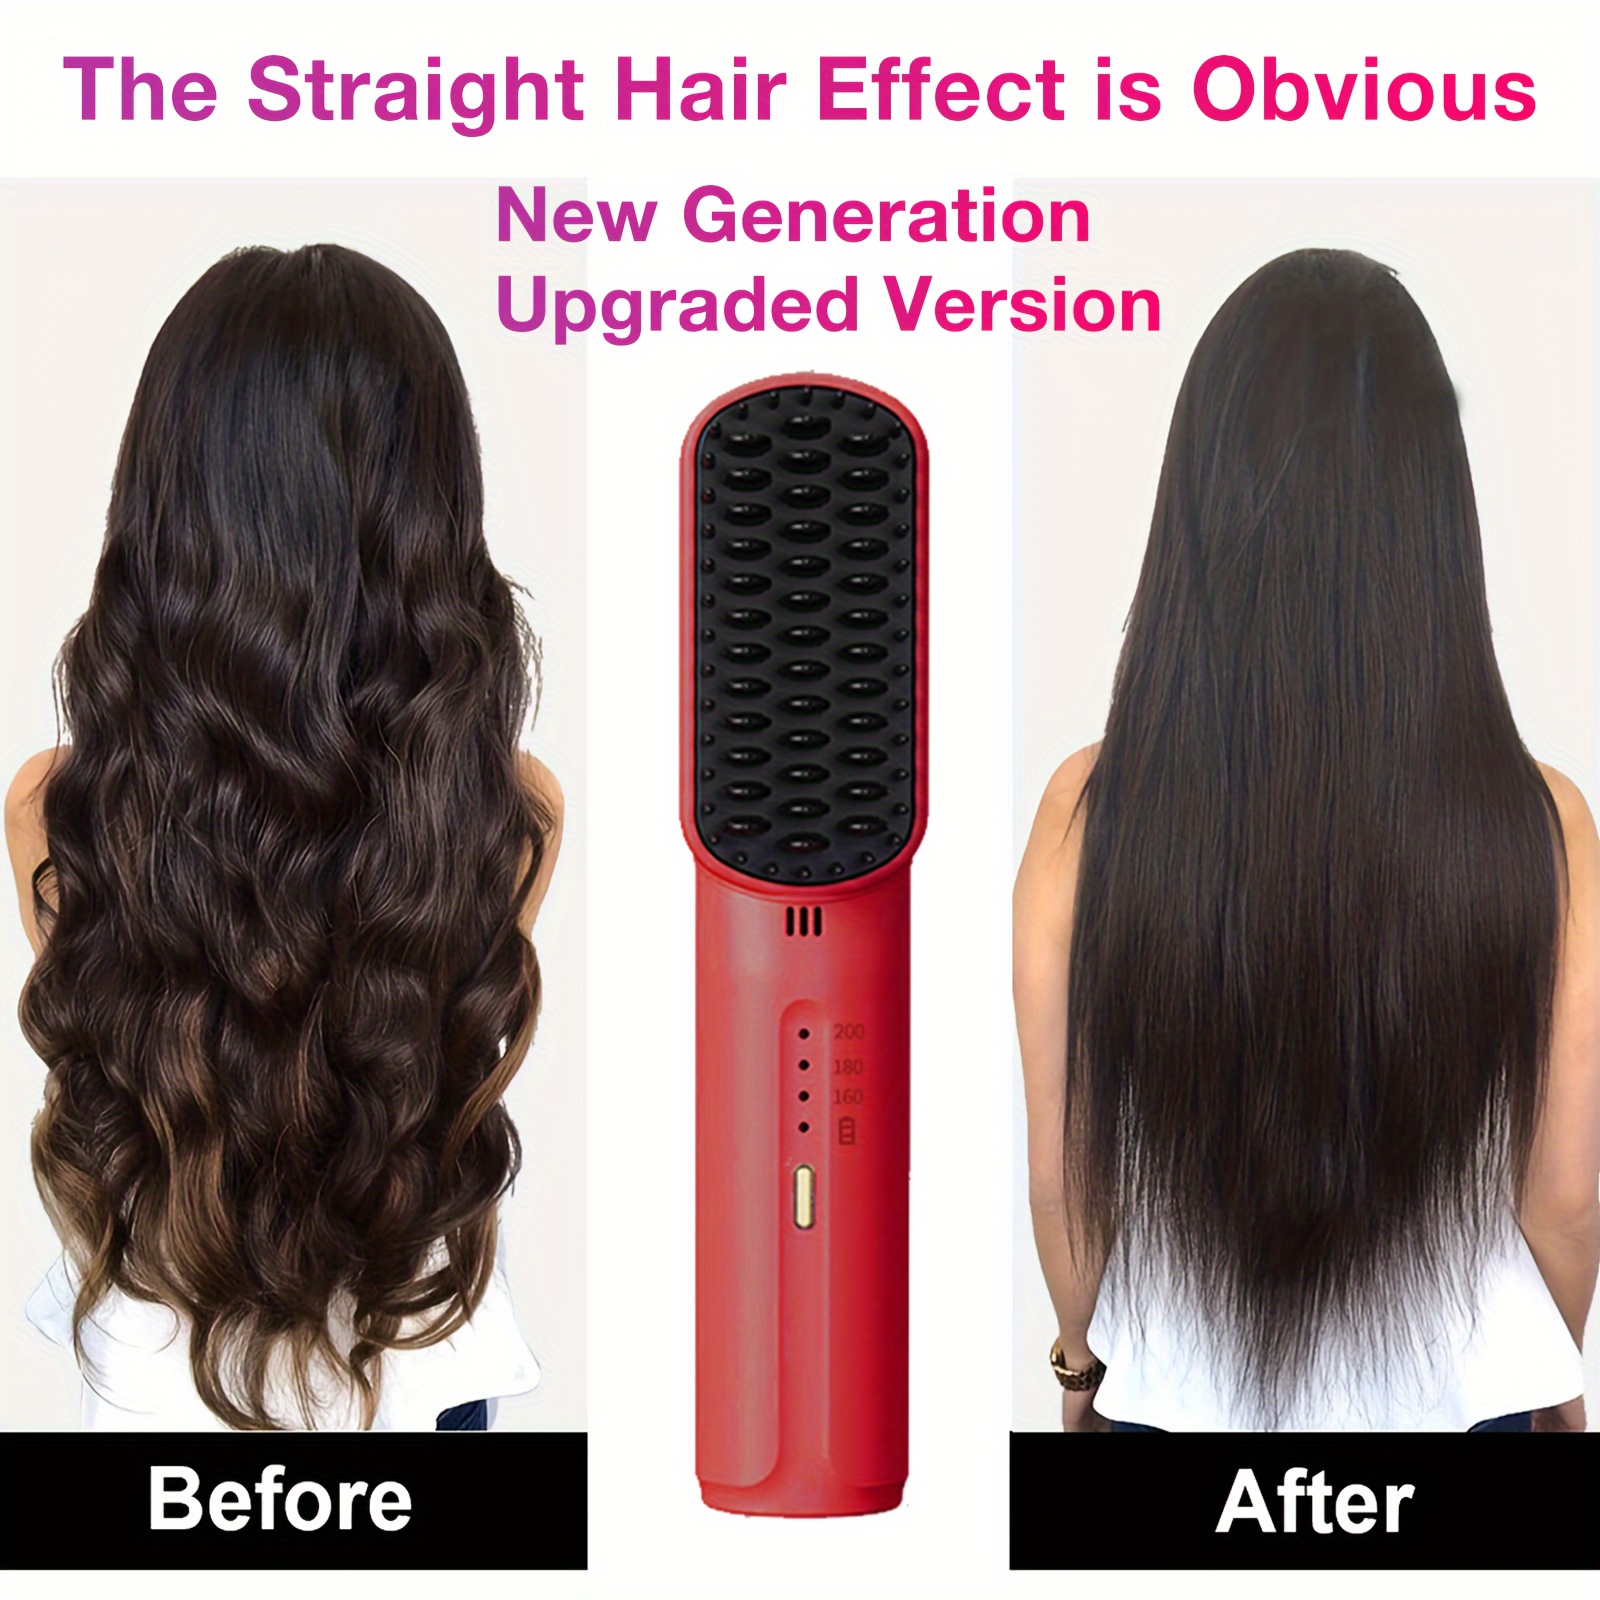 How To Straighten Hair At Home With And Without Straightener?